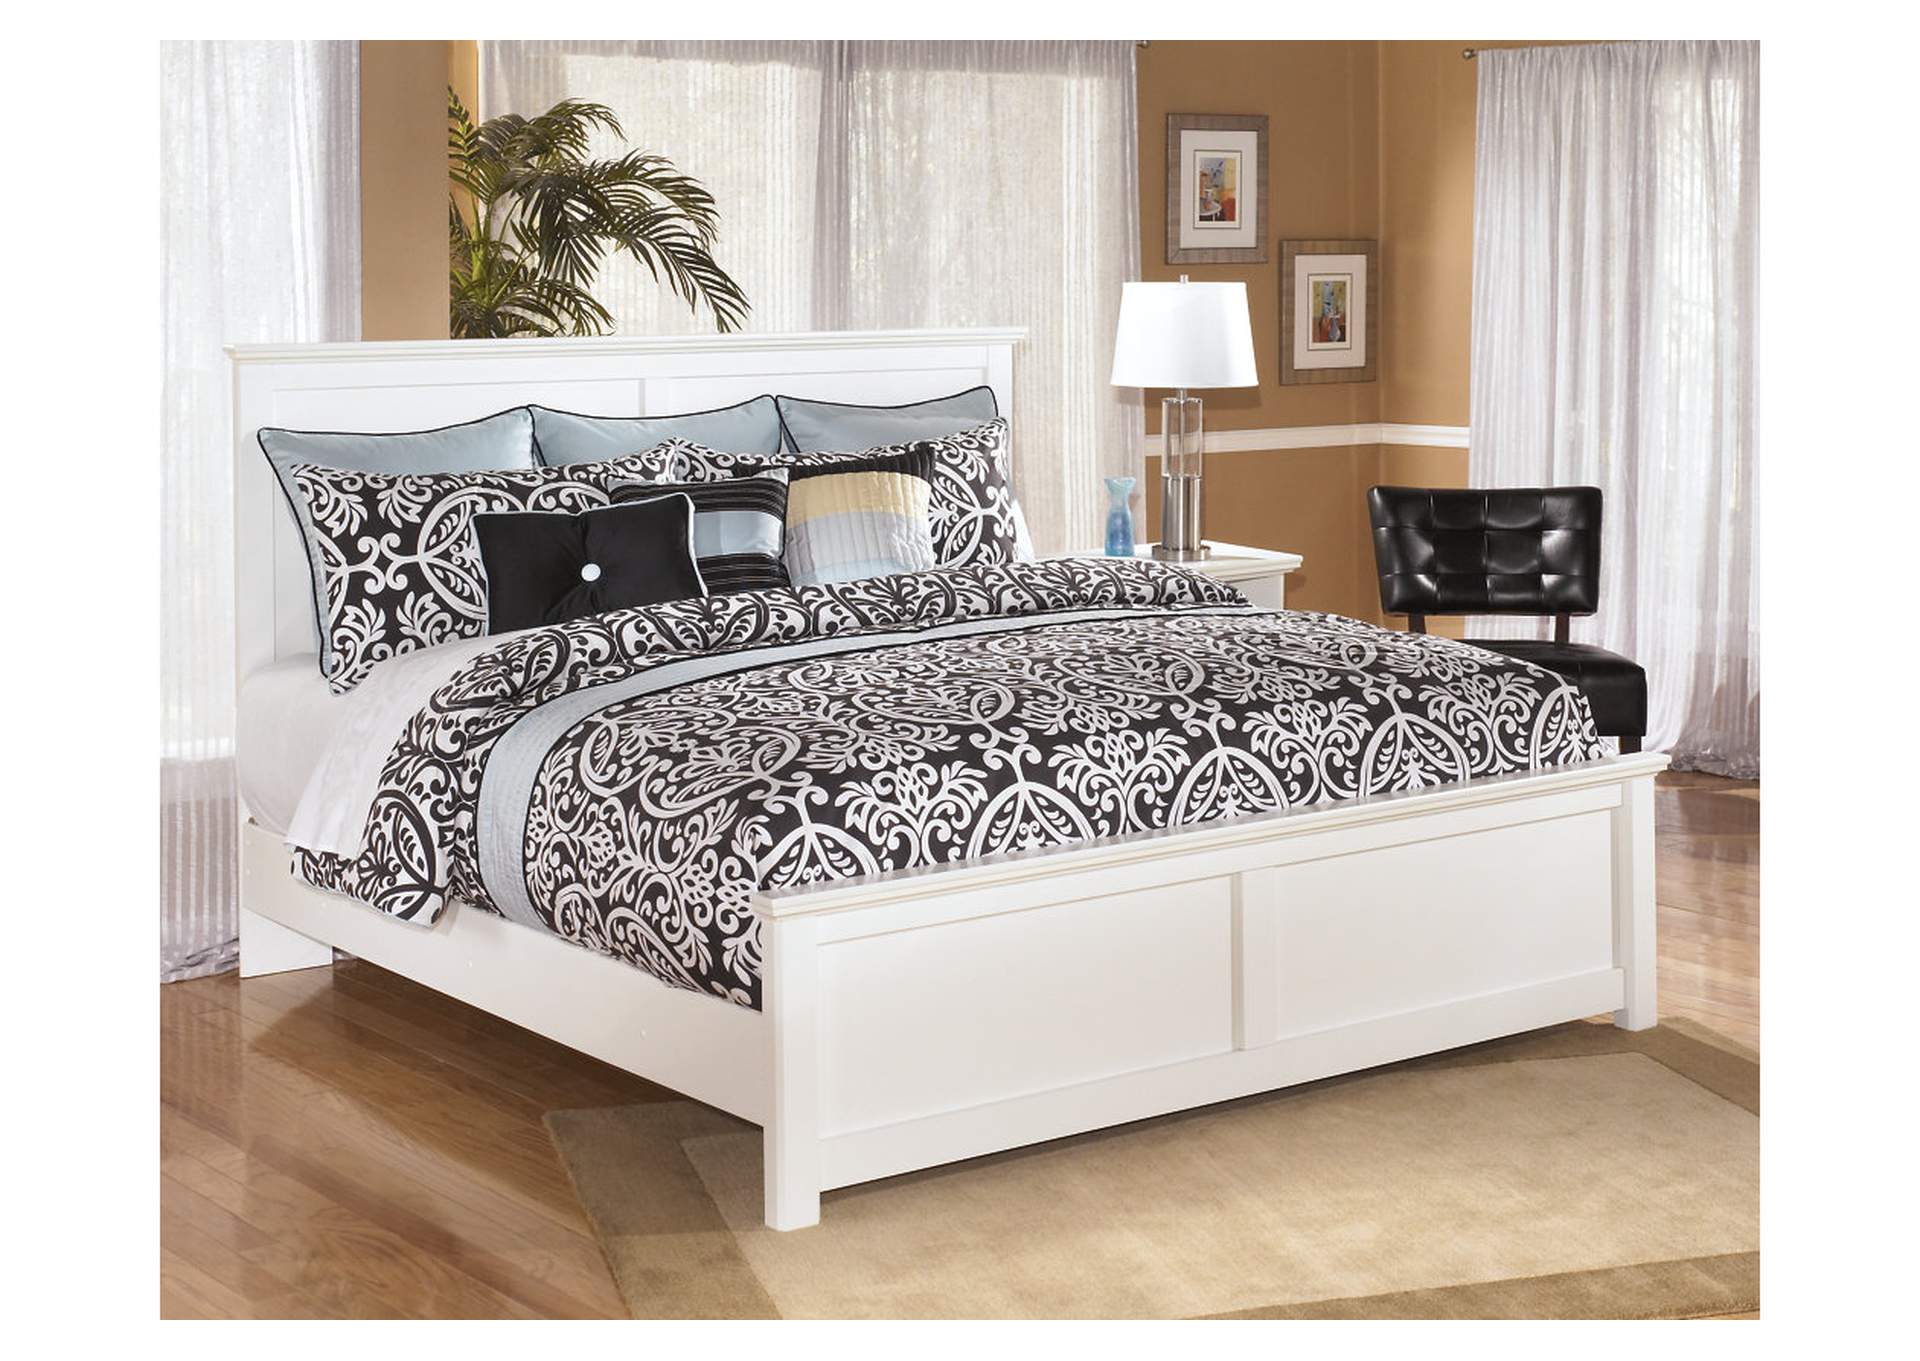 Bostwick Shoals King Panel Bed, Dresser and Mirror,Signature Design By Ashley